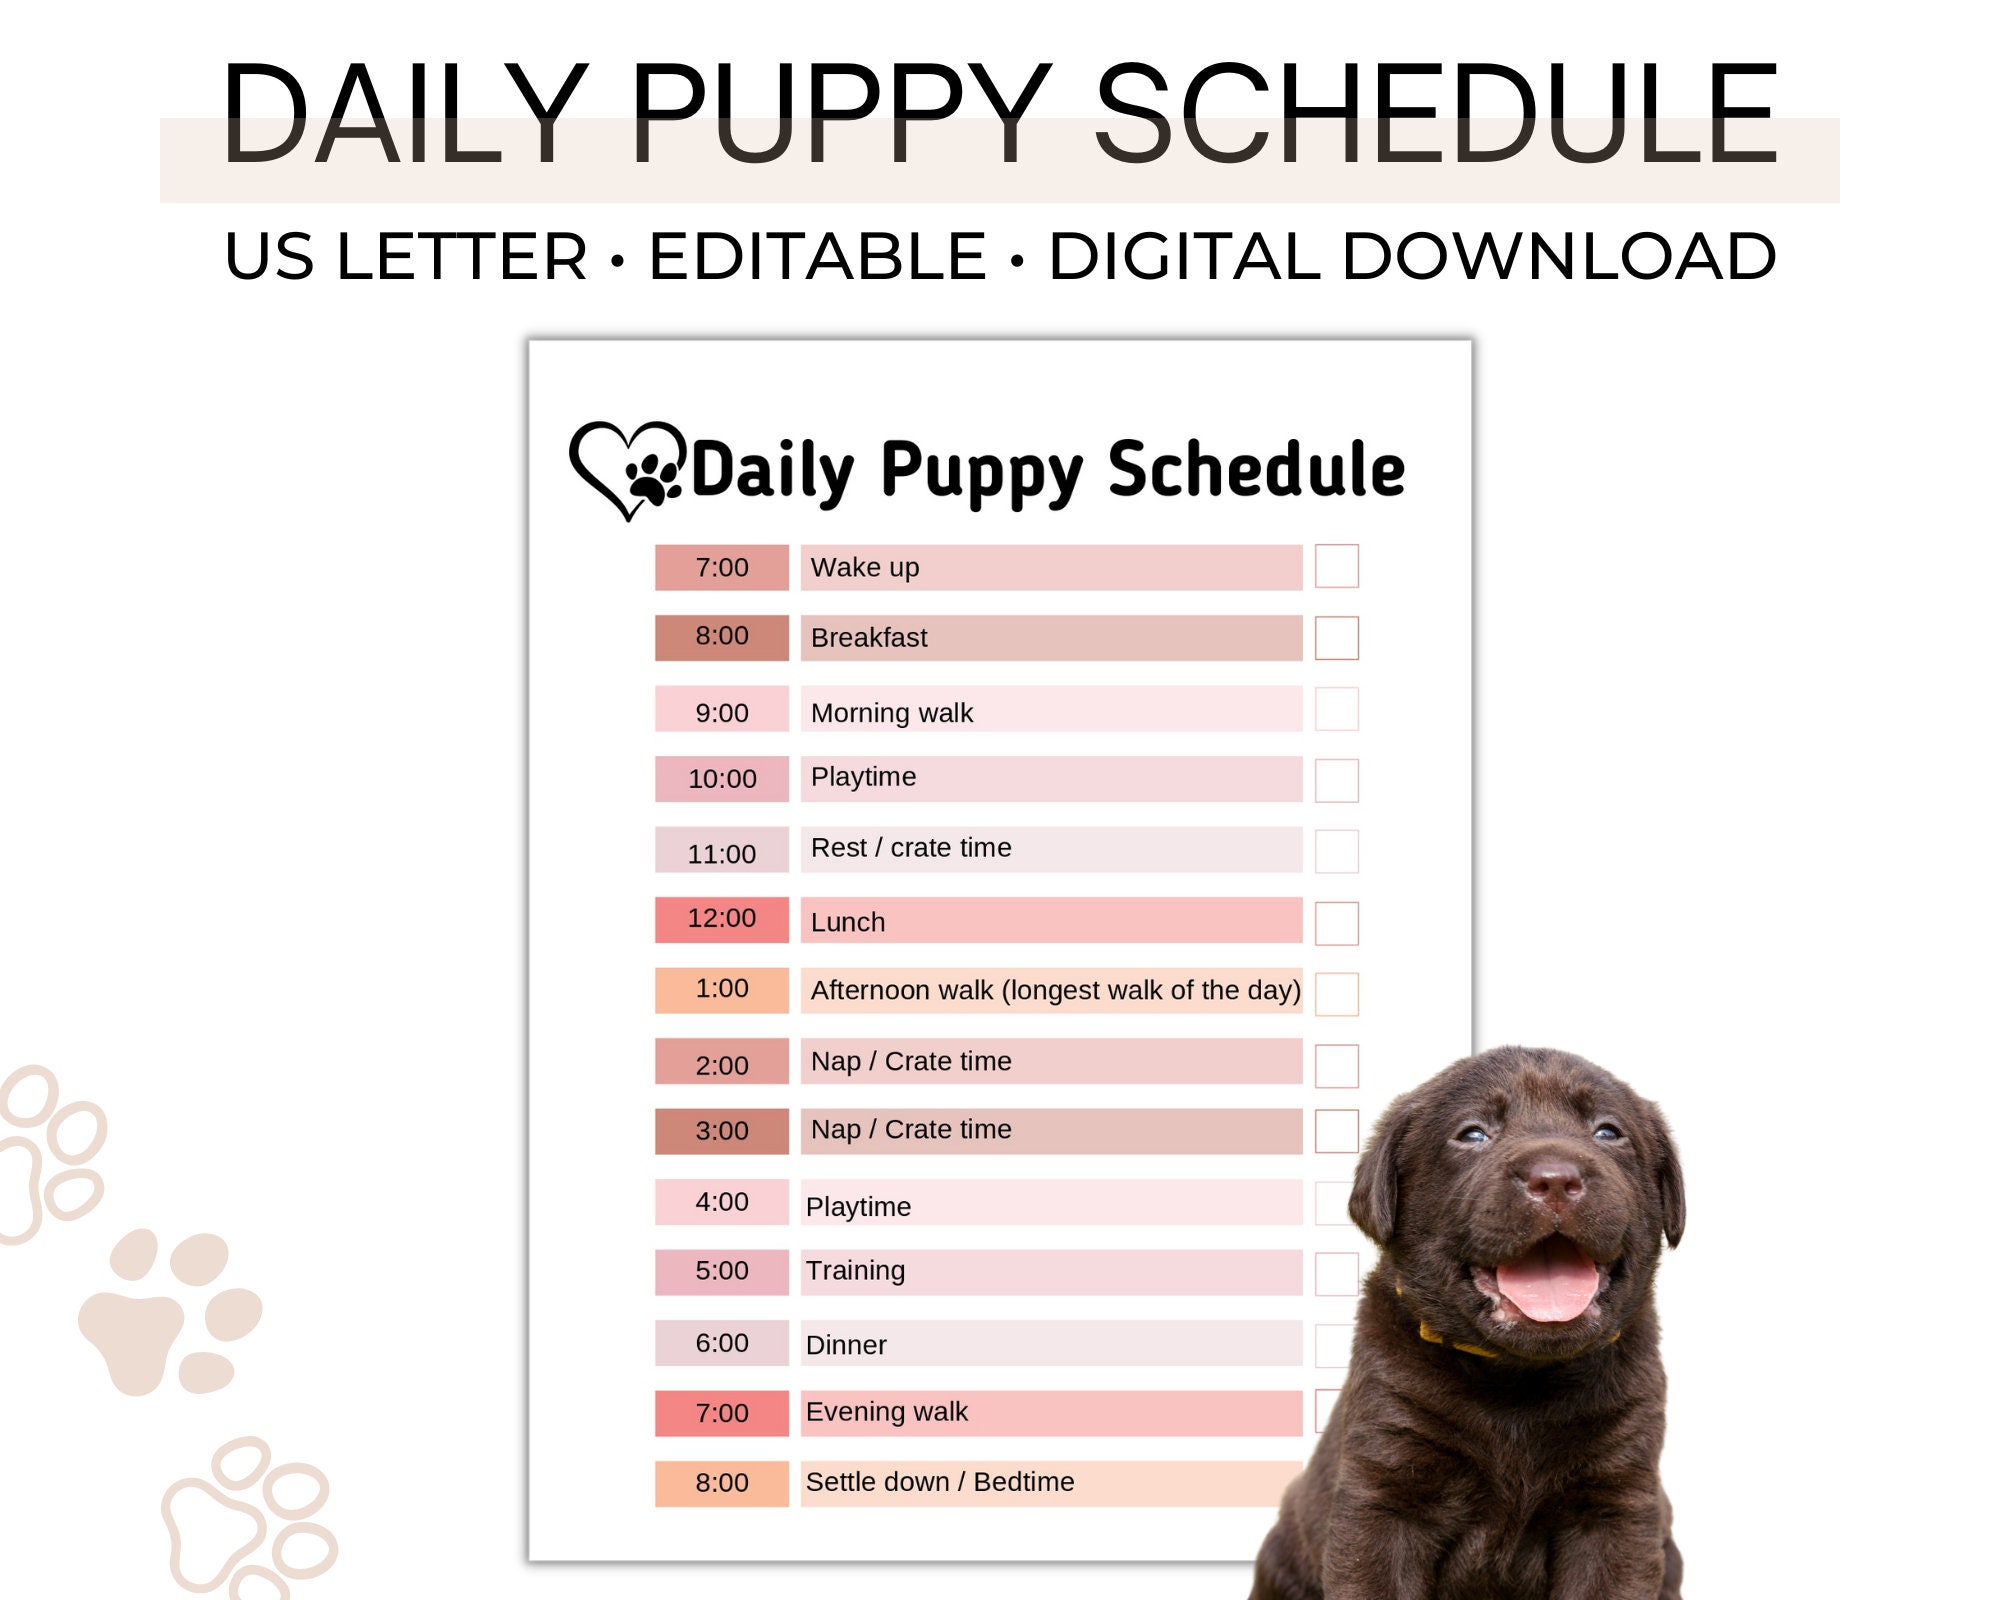 Complete Puppy Training Schedule by Age! — The Puppy Academy